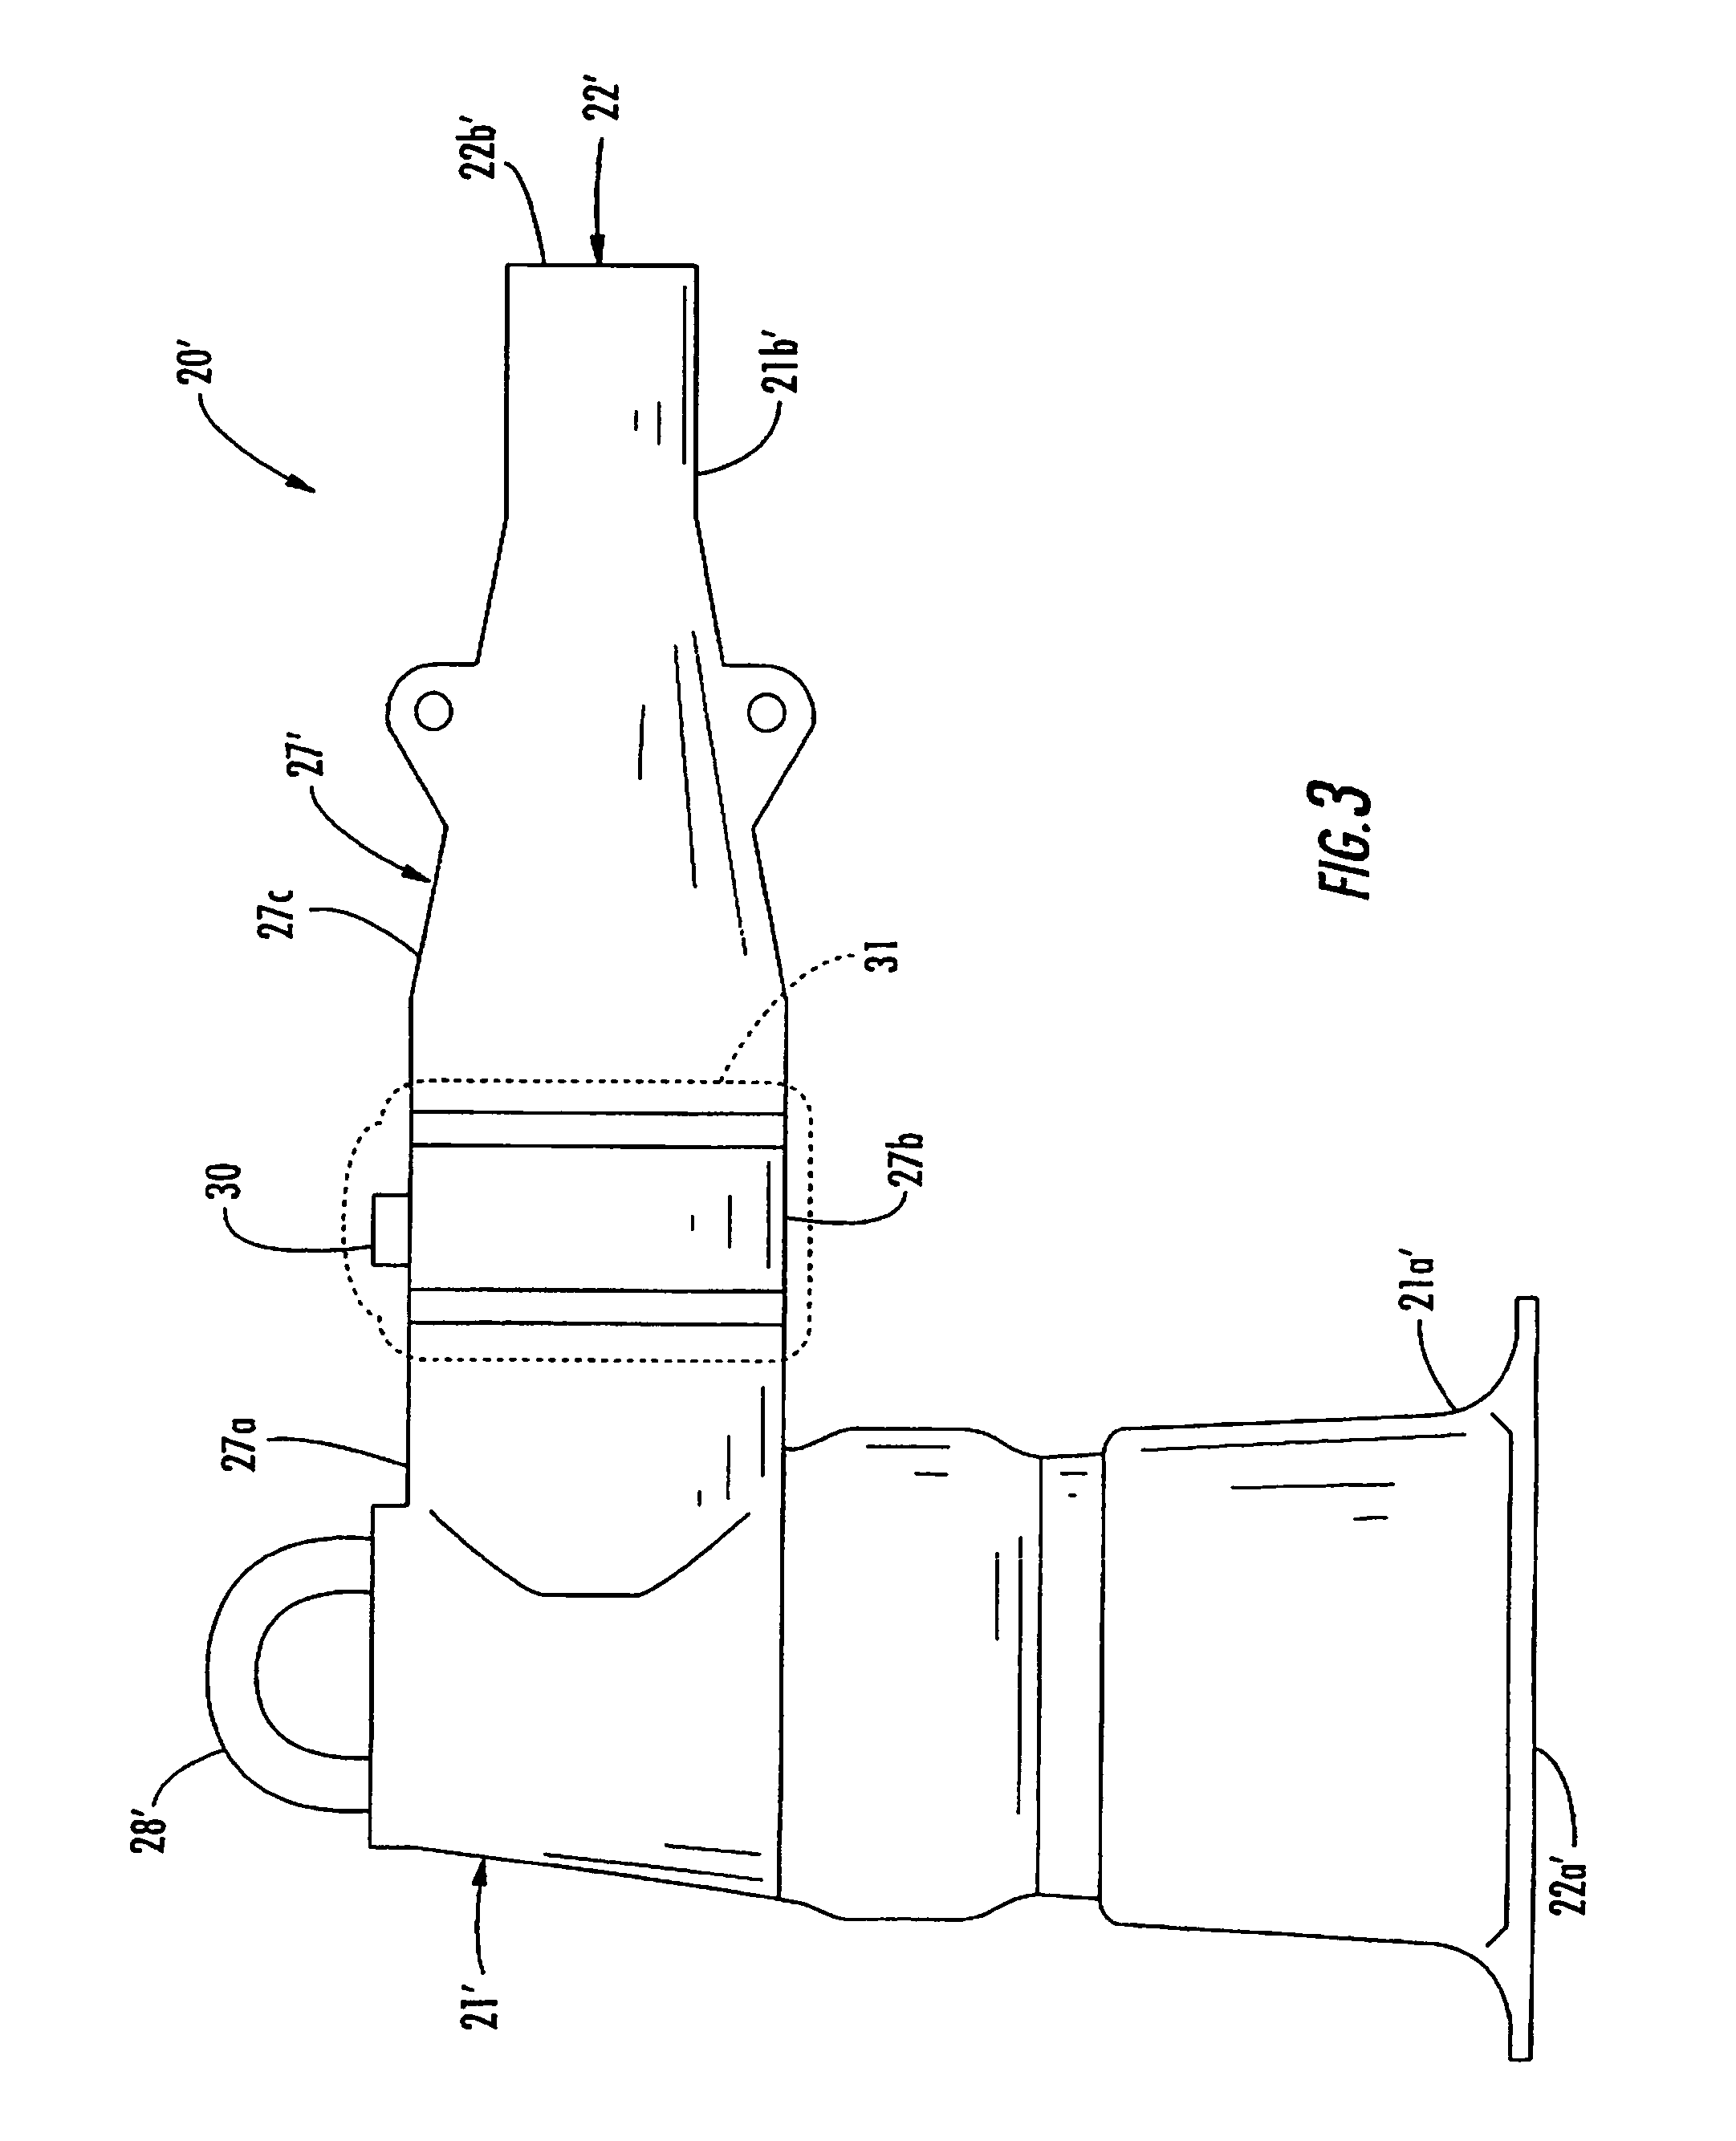 Electrical connector including silicone elastomeric material and associated methods